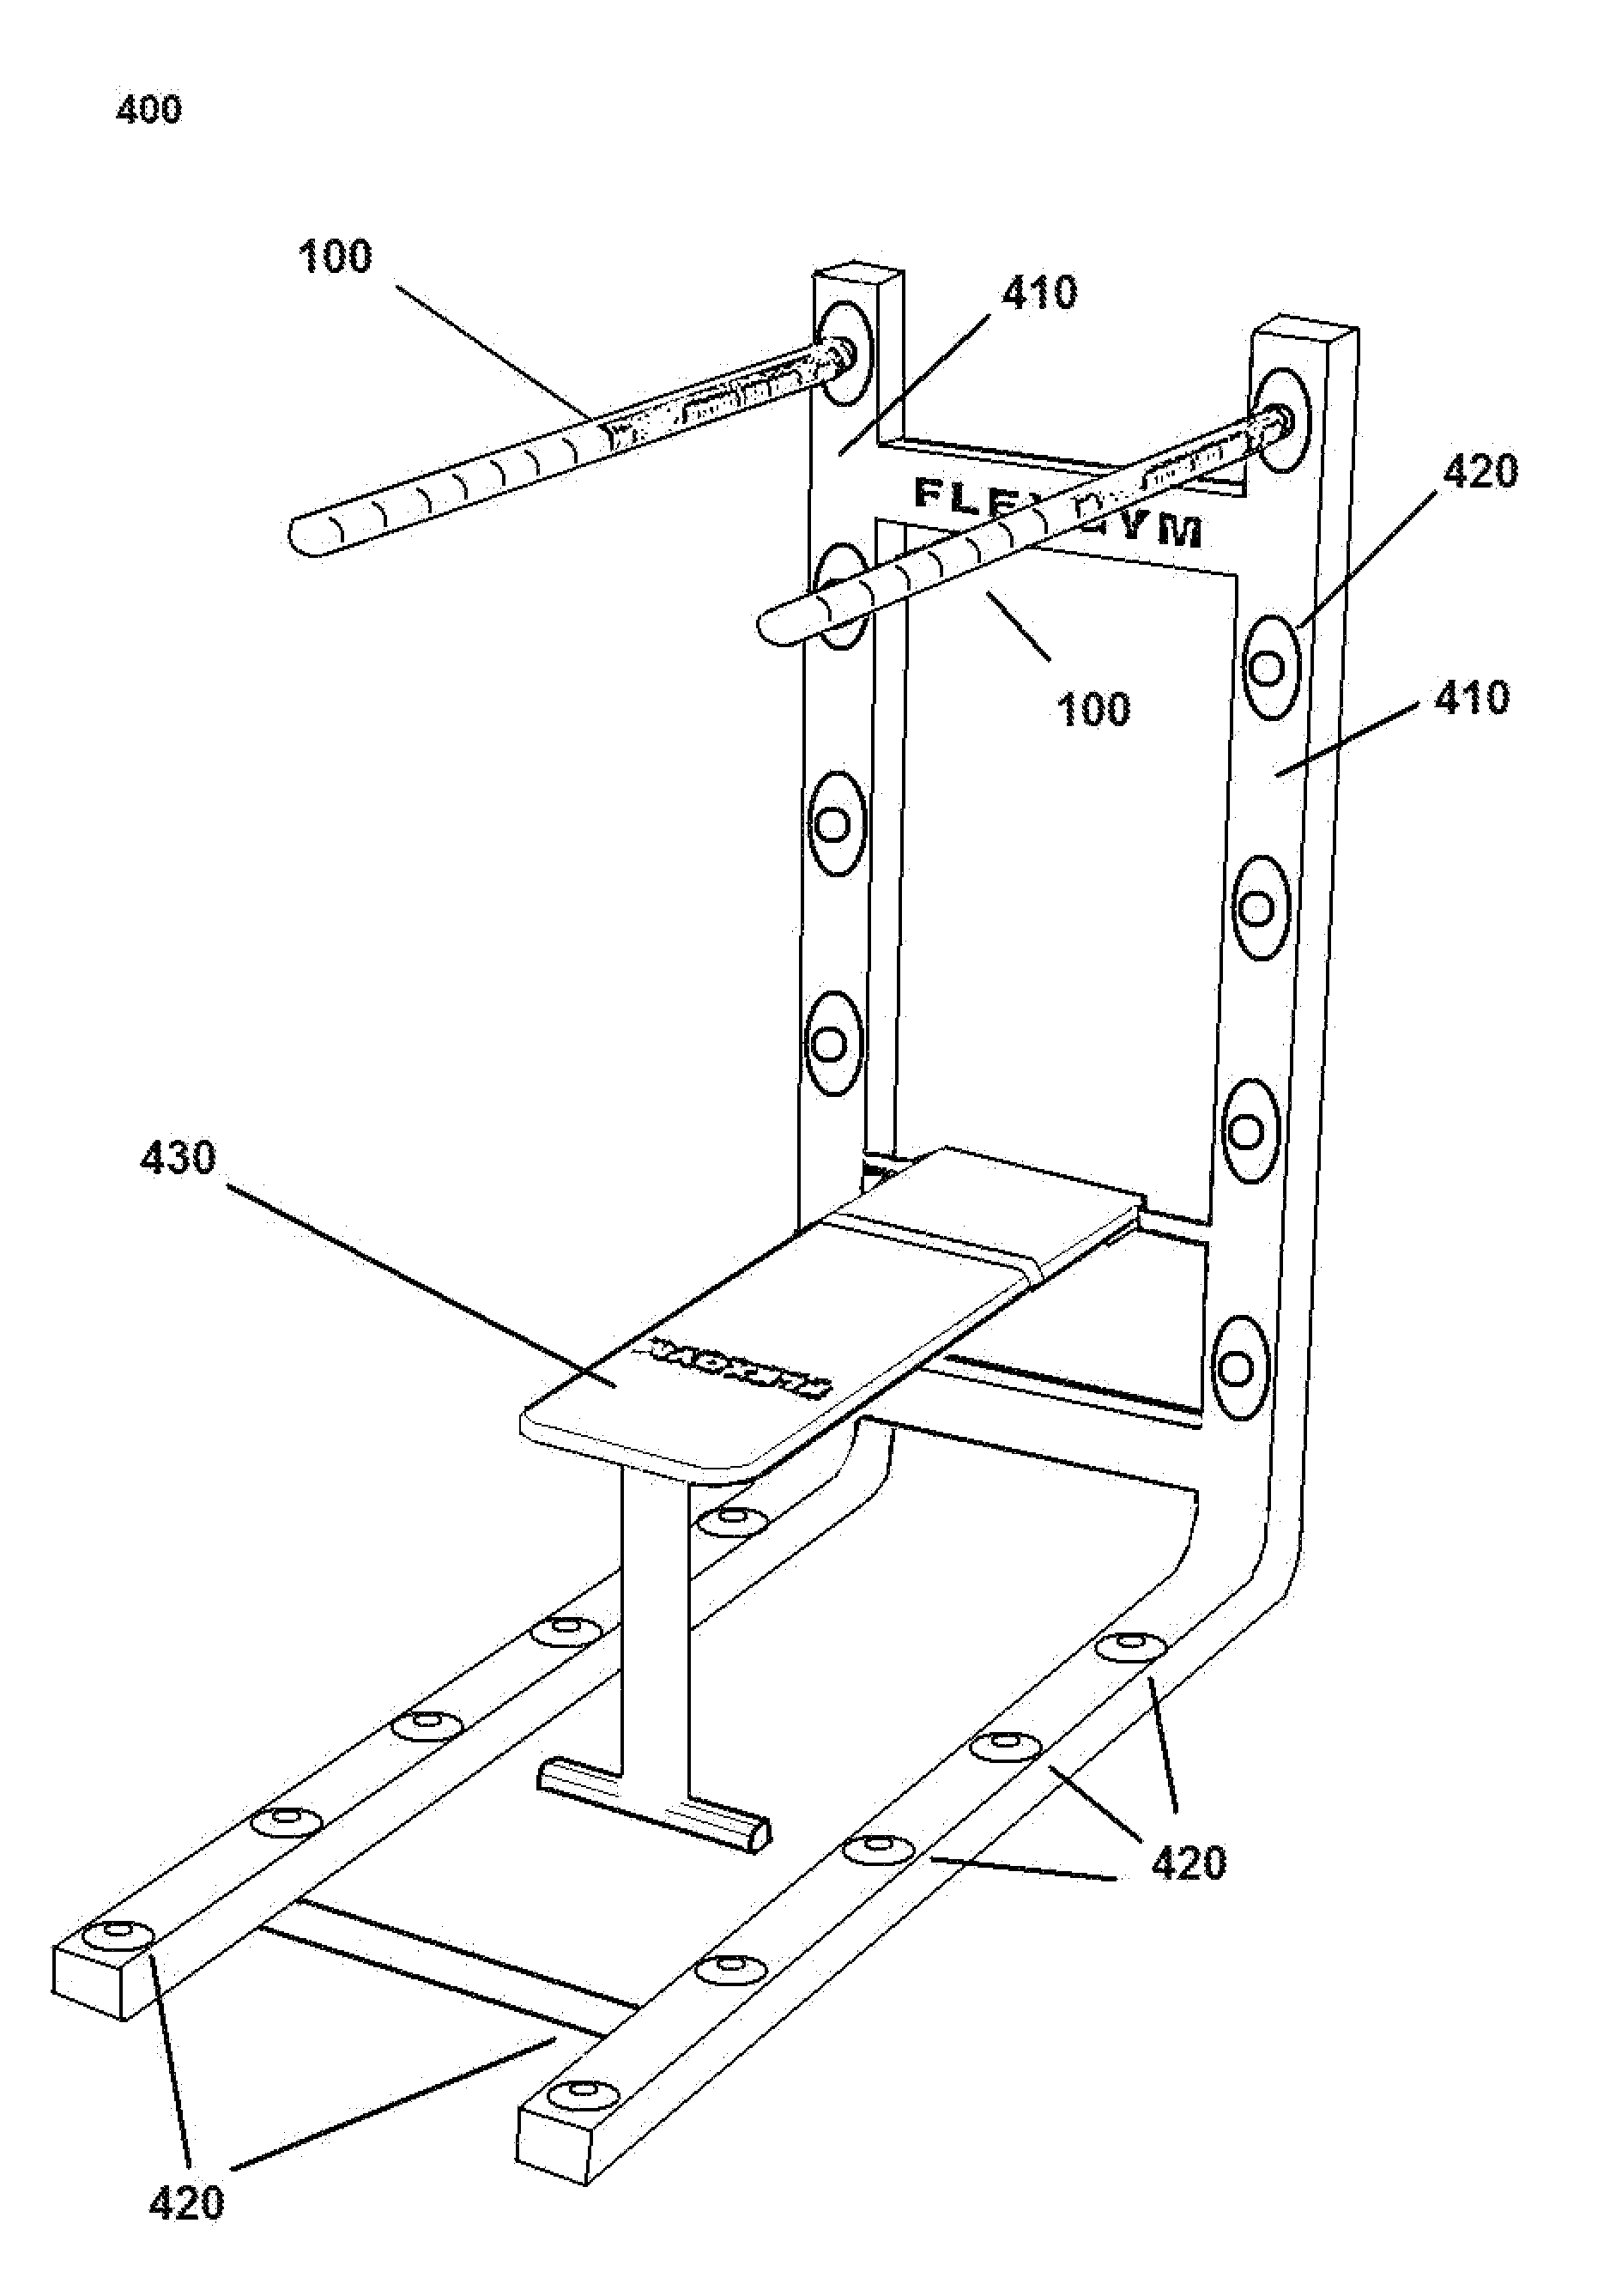 Methods for Adjusting Stiffness and Flexibility in Devices, Apparatus and Equipment